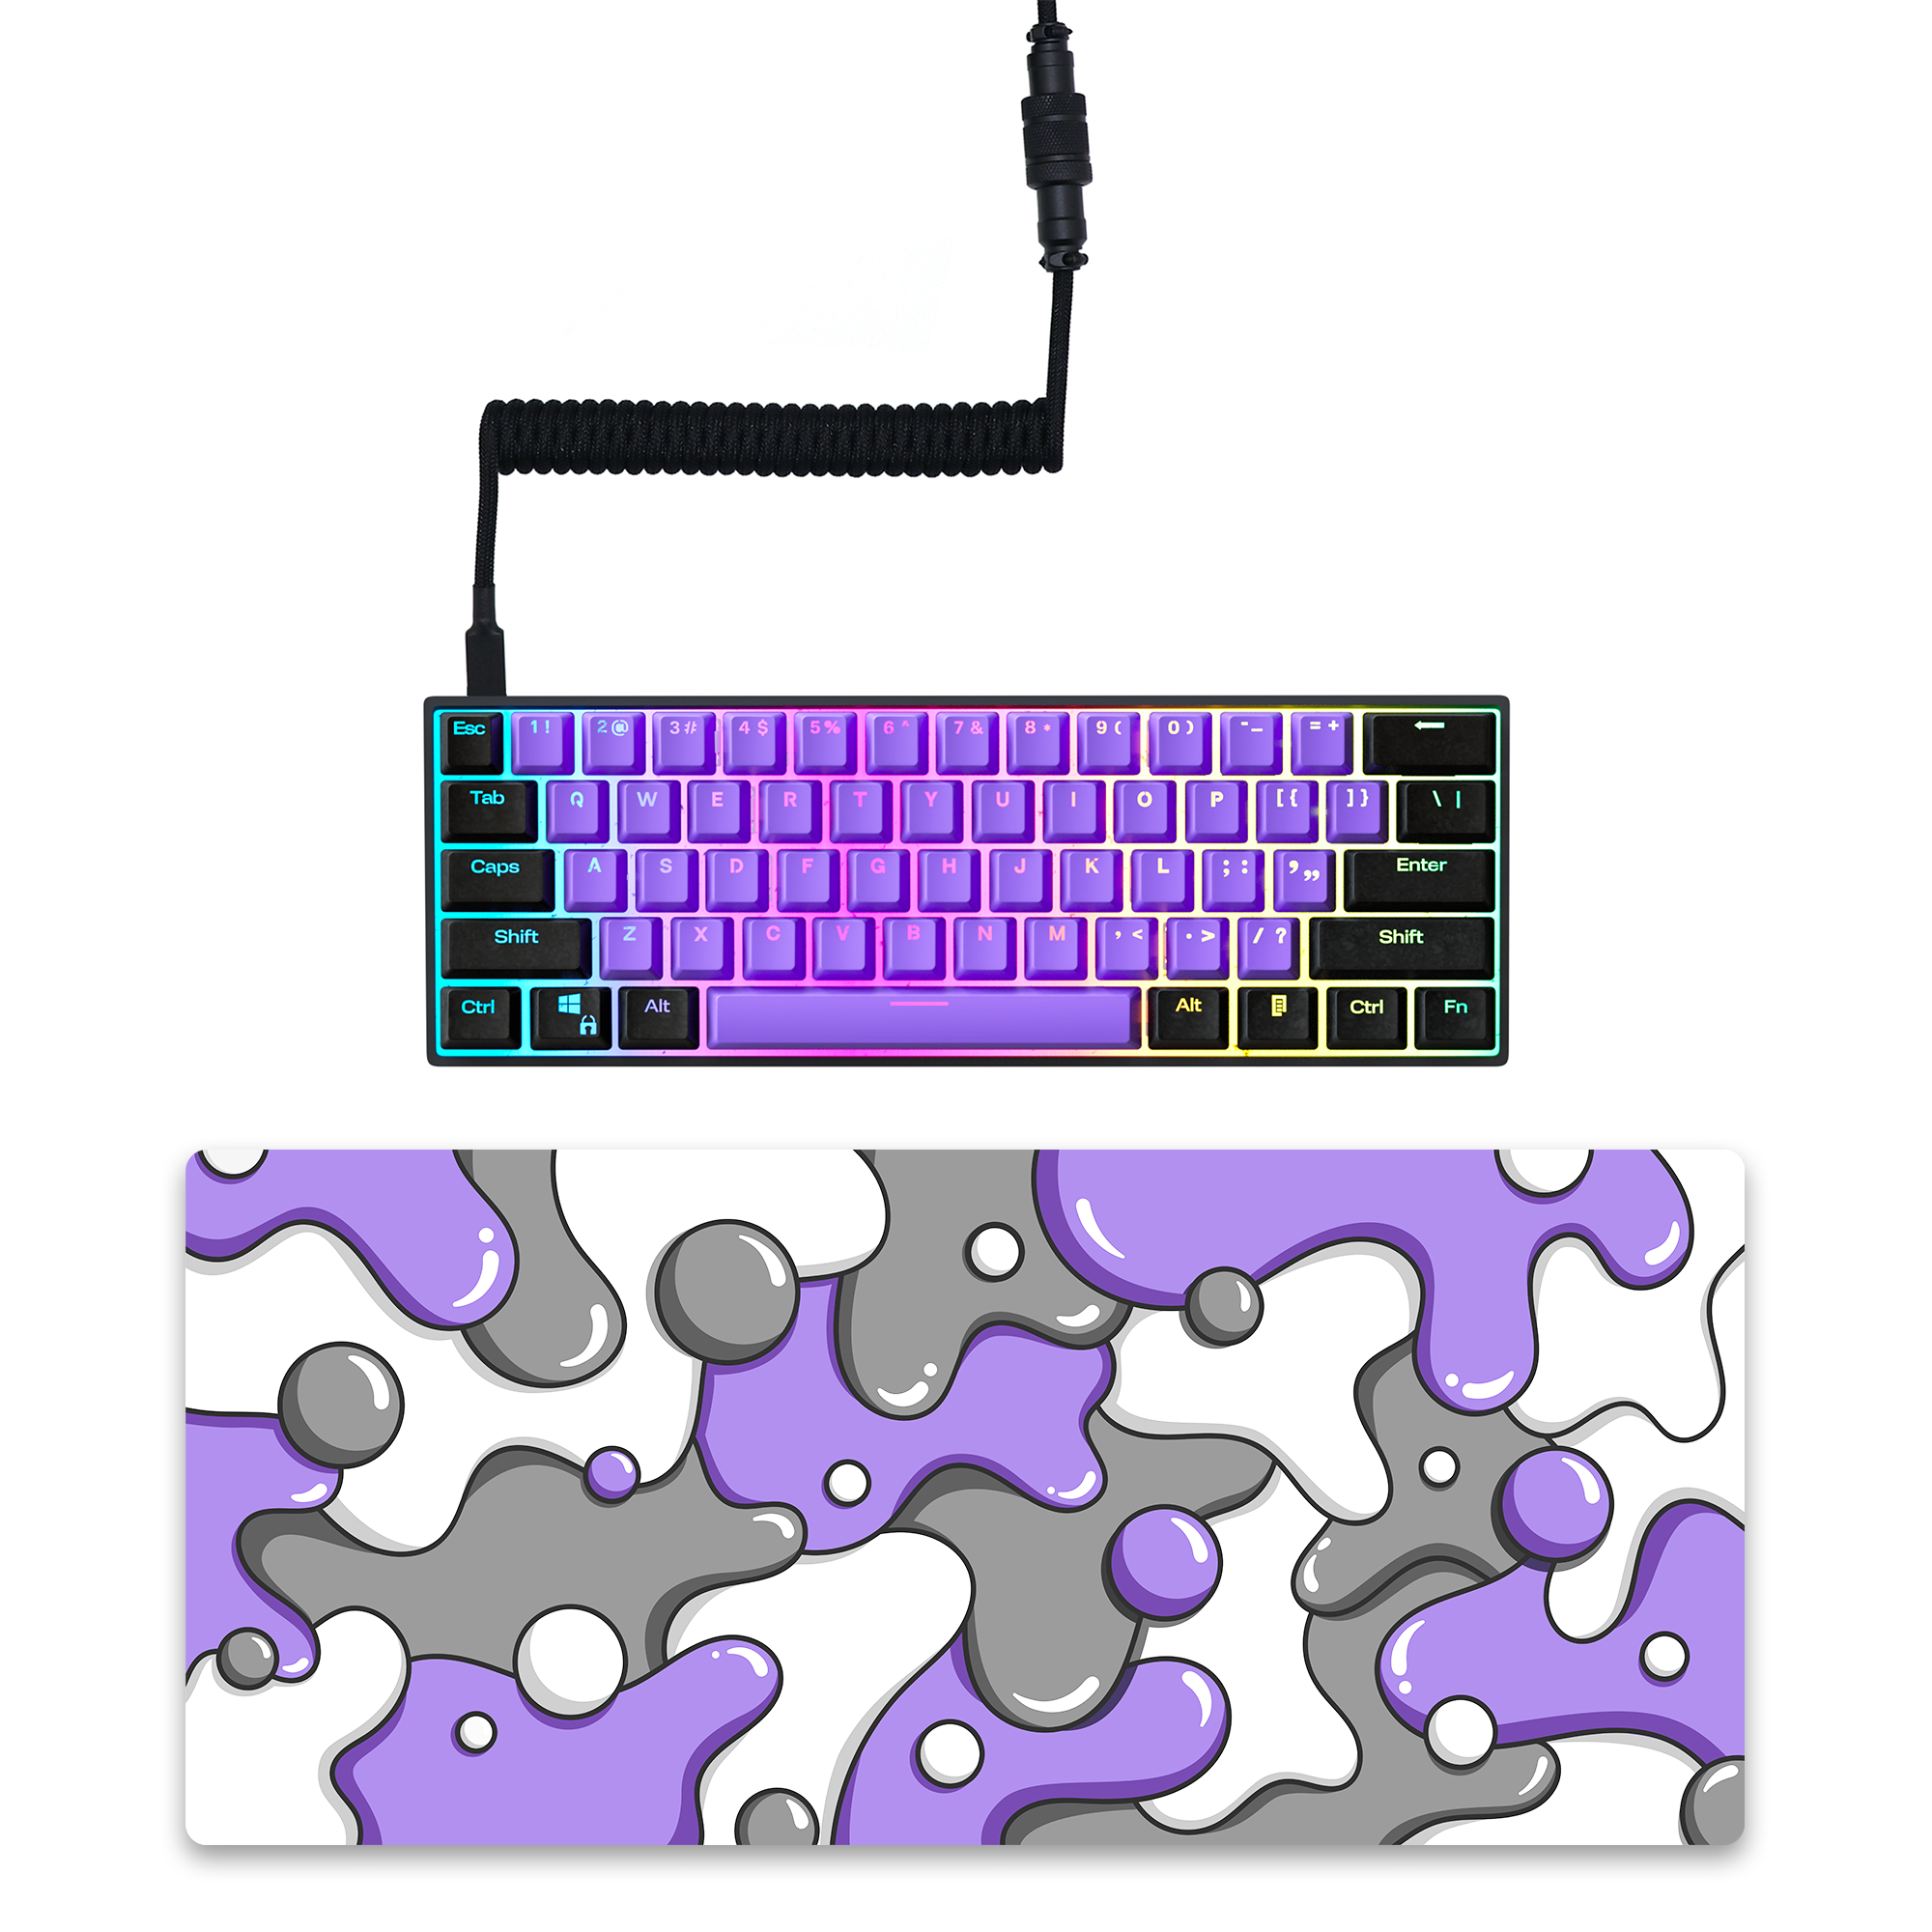 Kraken Cable + XXL Mouse Pad Bundle (Black Coiled Keyboard Cable and Purple  XXL Extending Gaming Mouse Pad)